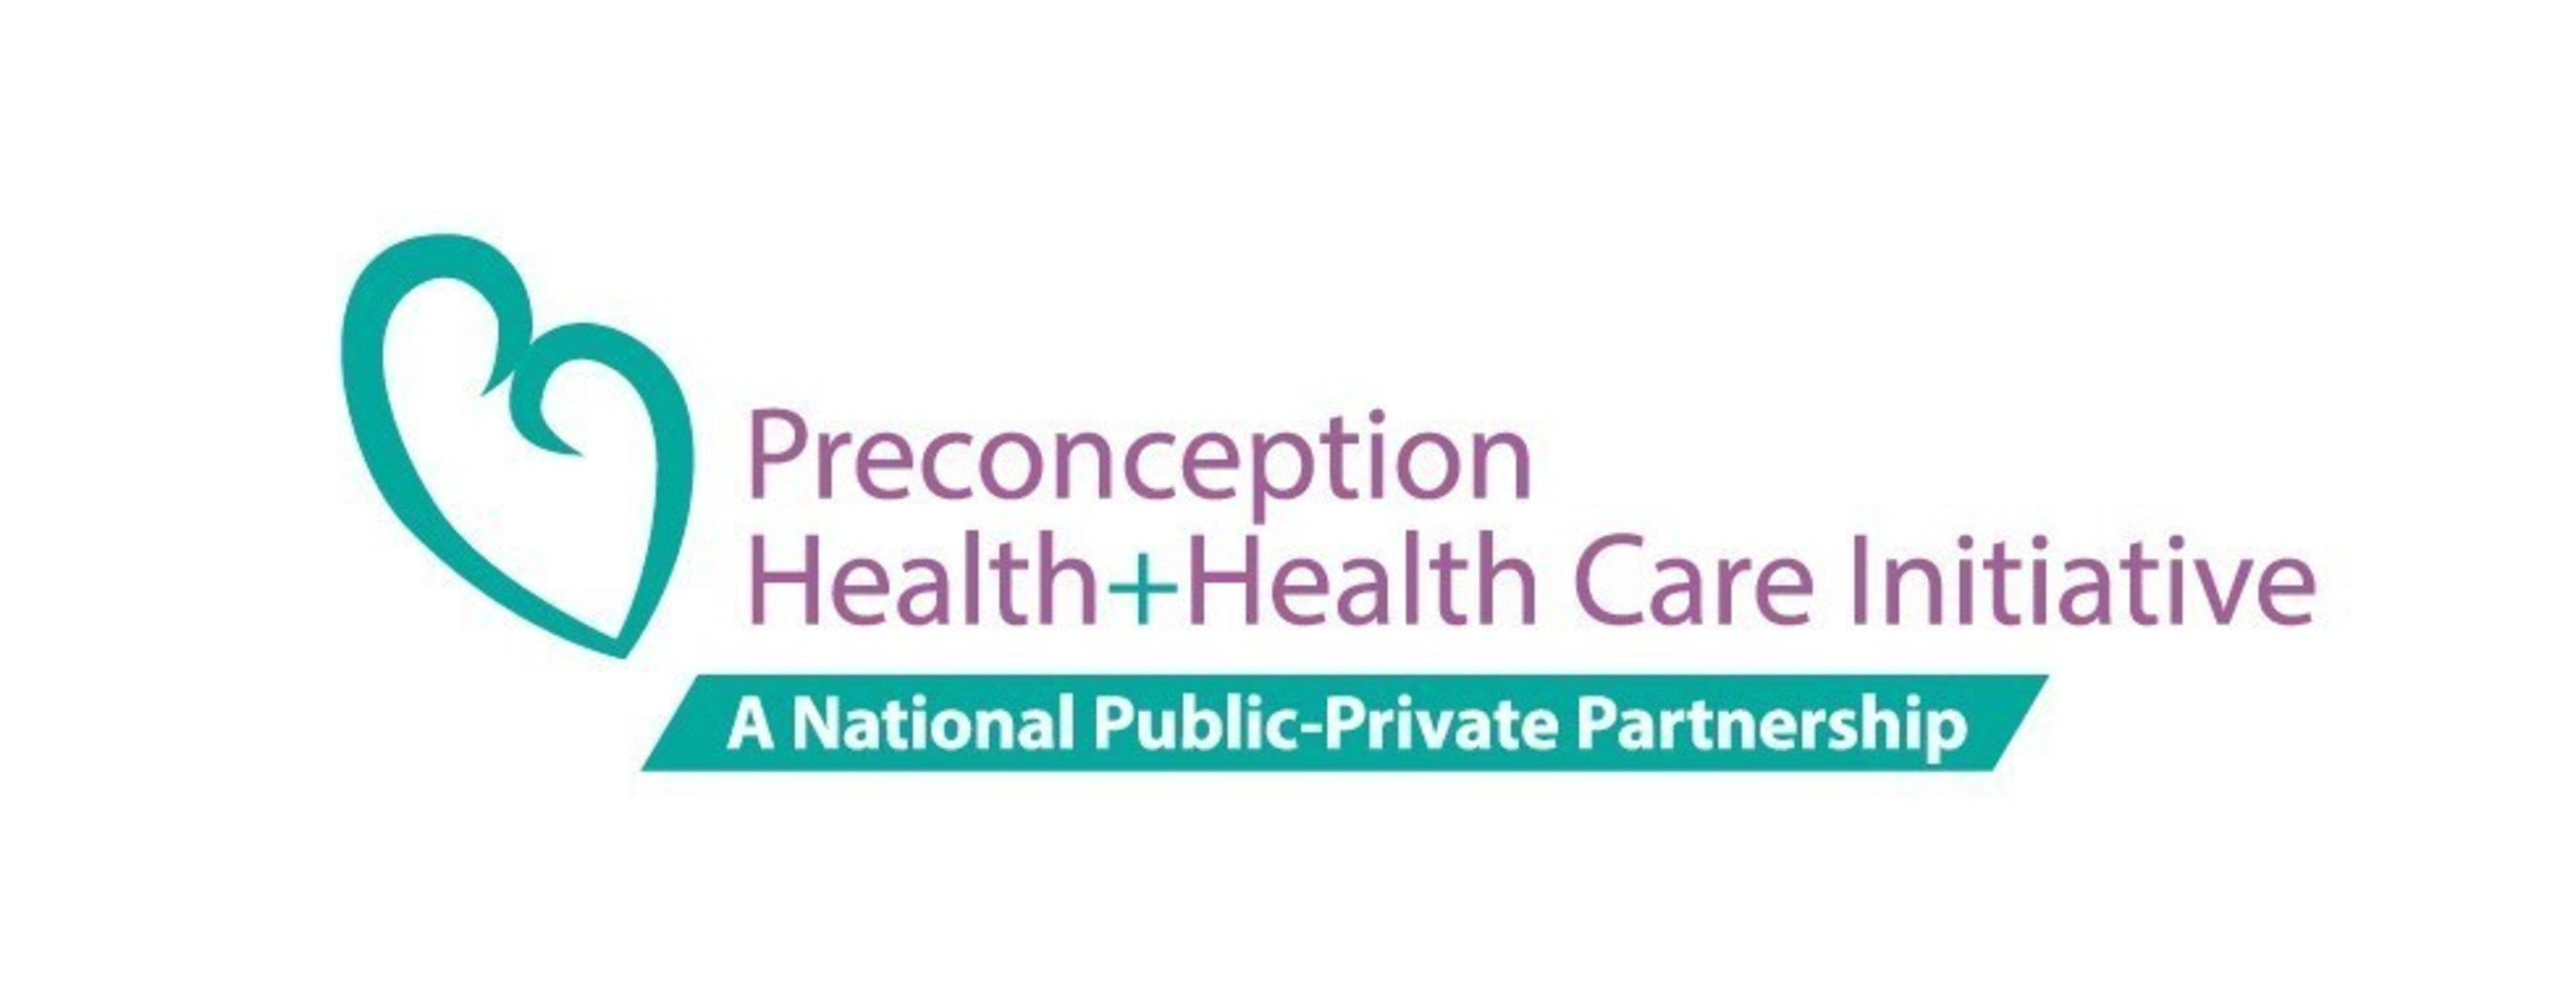 The National Preconception Health and Health Care Initiative